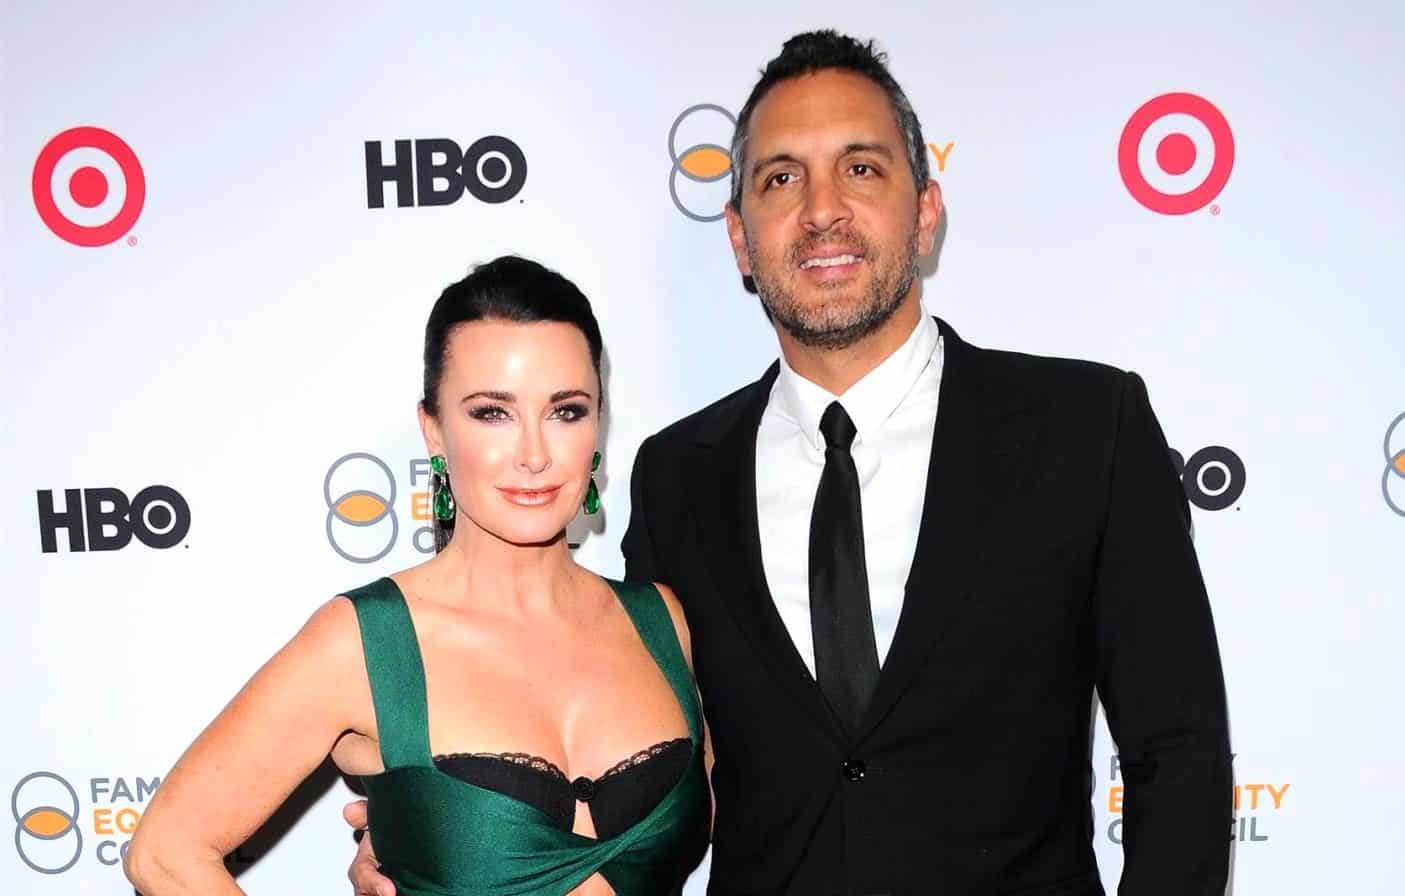 Kyle Richards and Mauricio Umansky Raise Price of Bel-Air Mansion, Now Listed at $6.5 Million